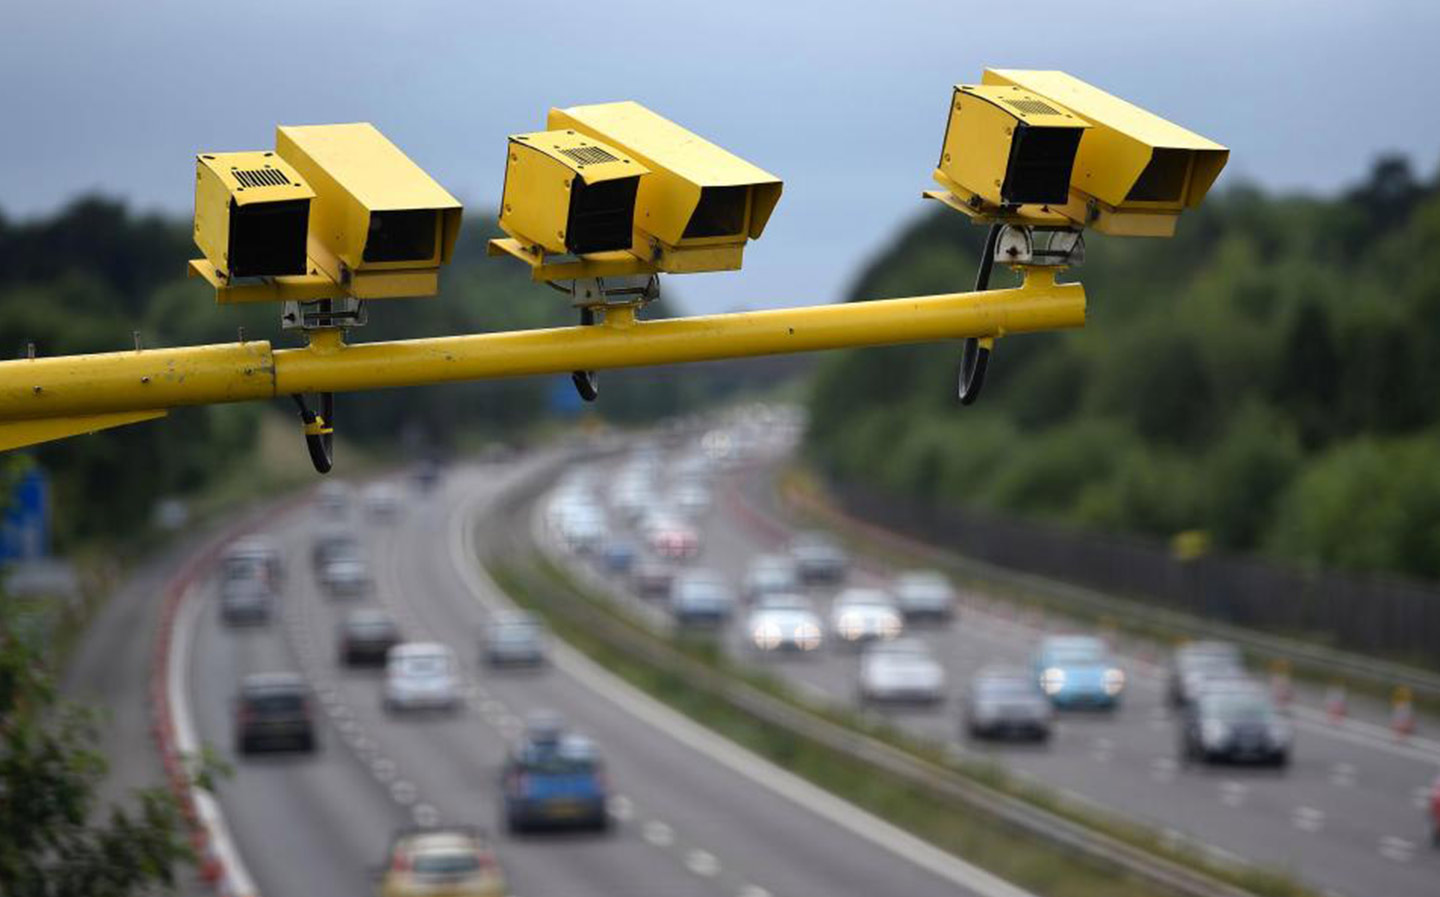 How do average speed cameras work, and does changing lane help avoid speeding fines?